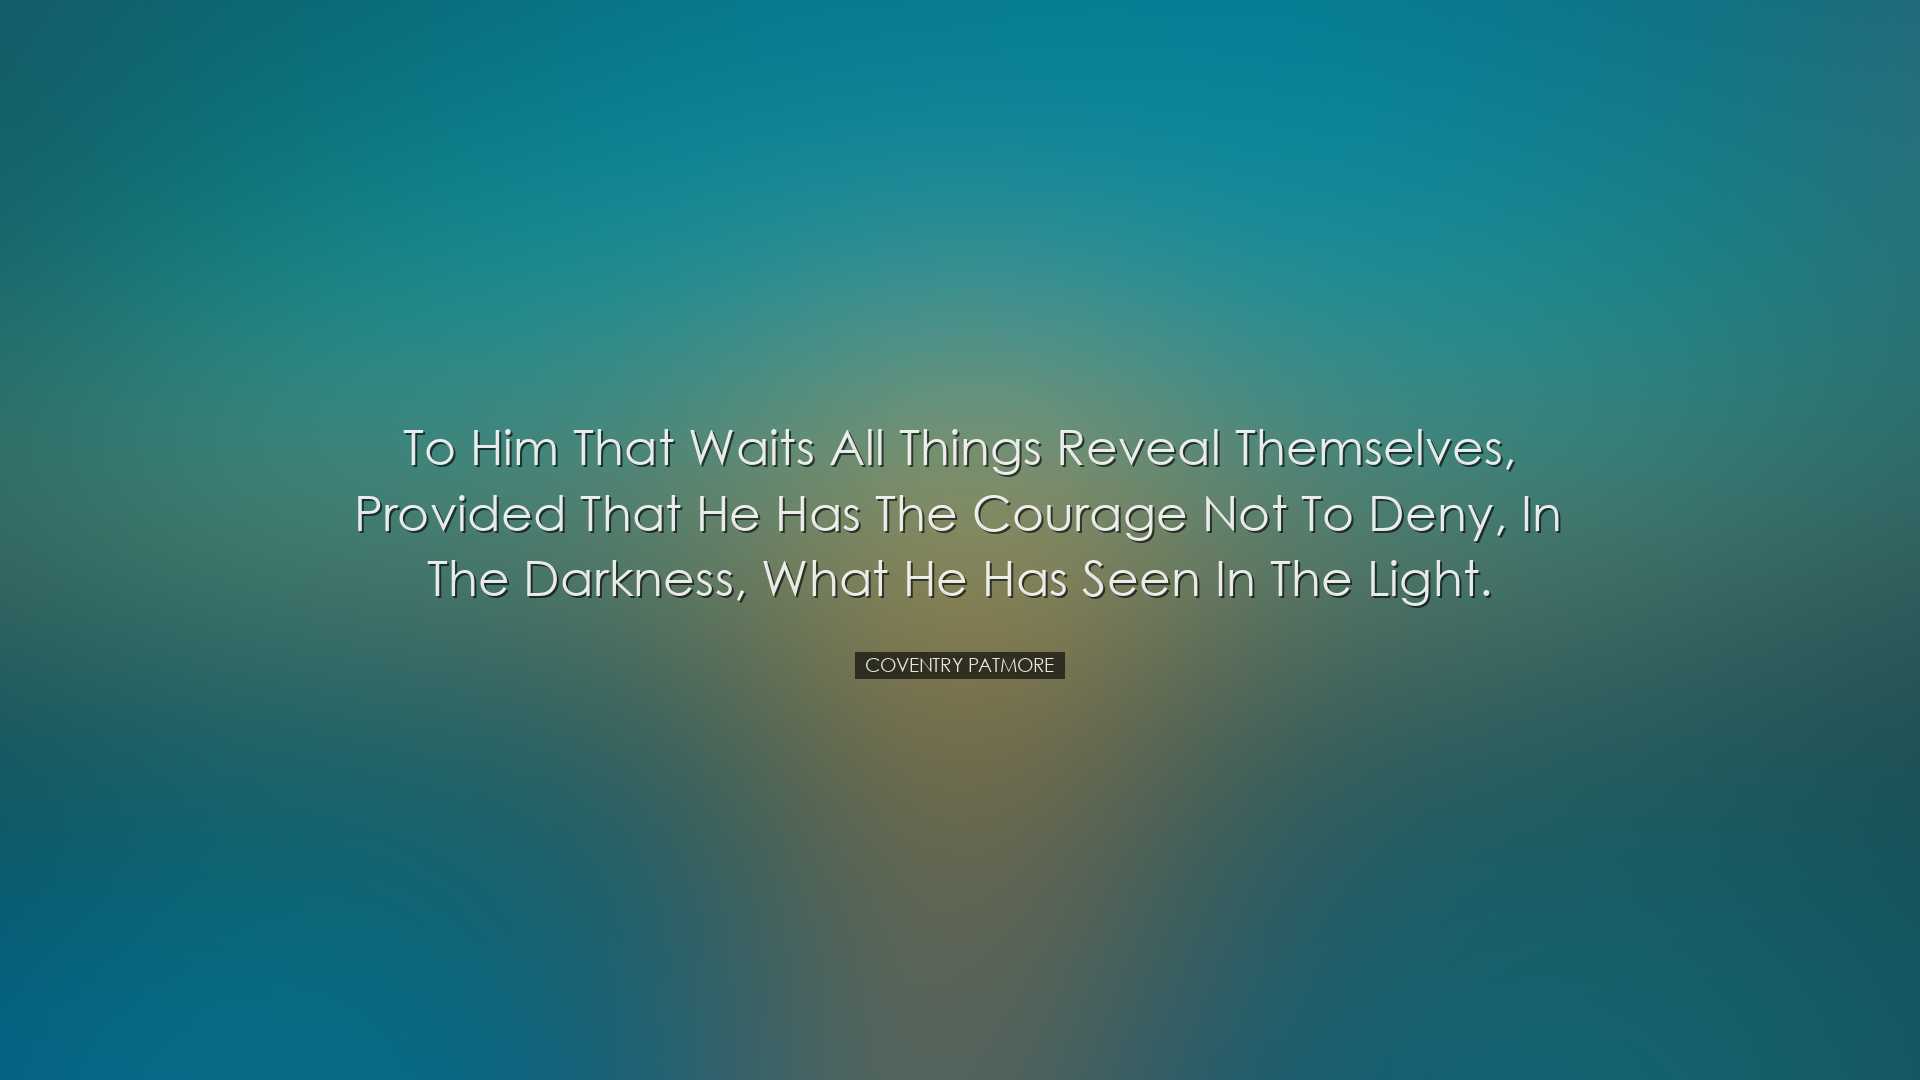 To him that waits all things reveal themselves, provided that he h